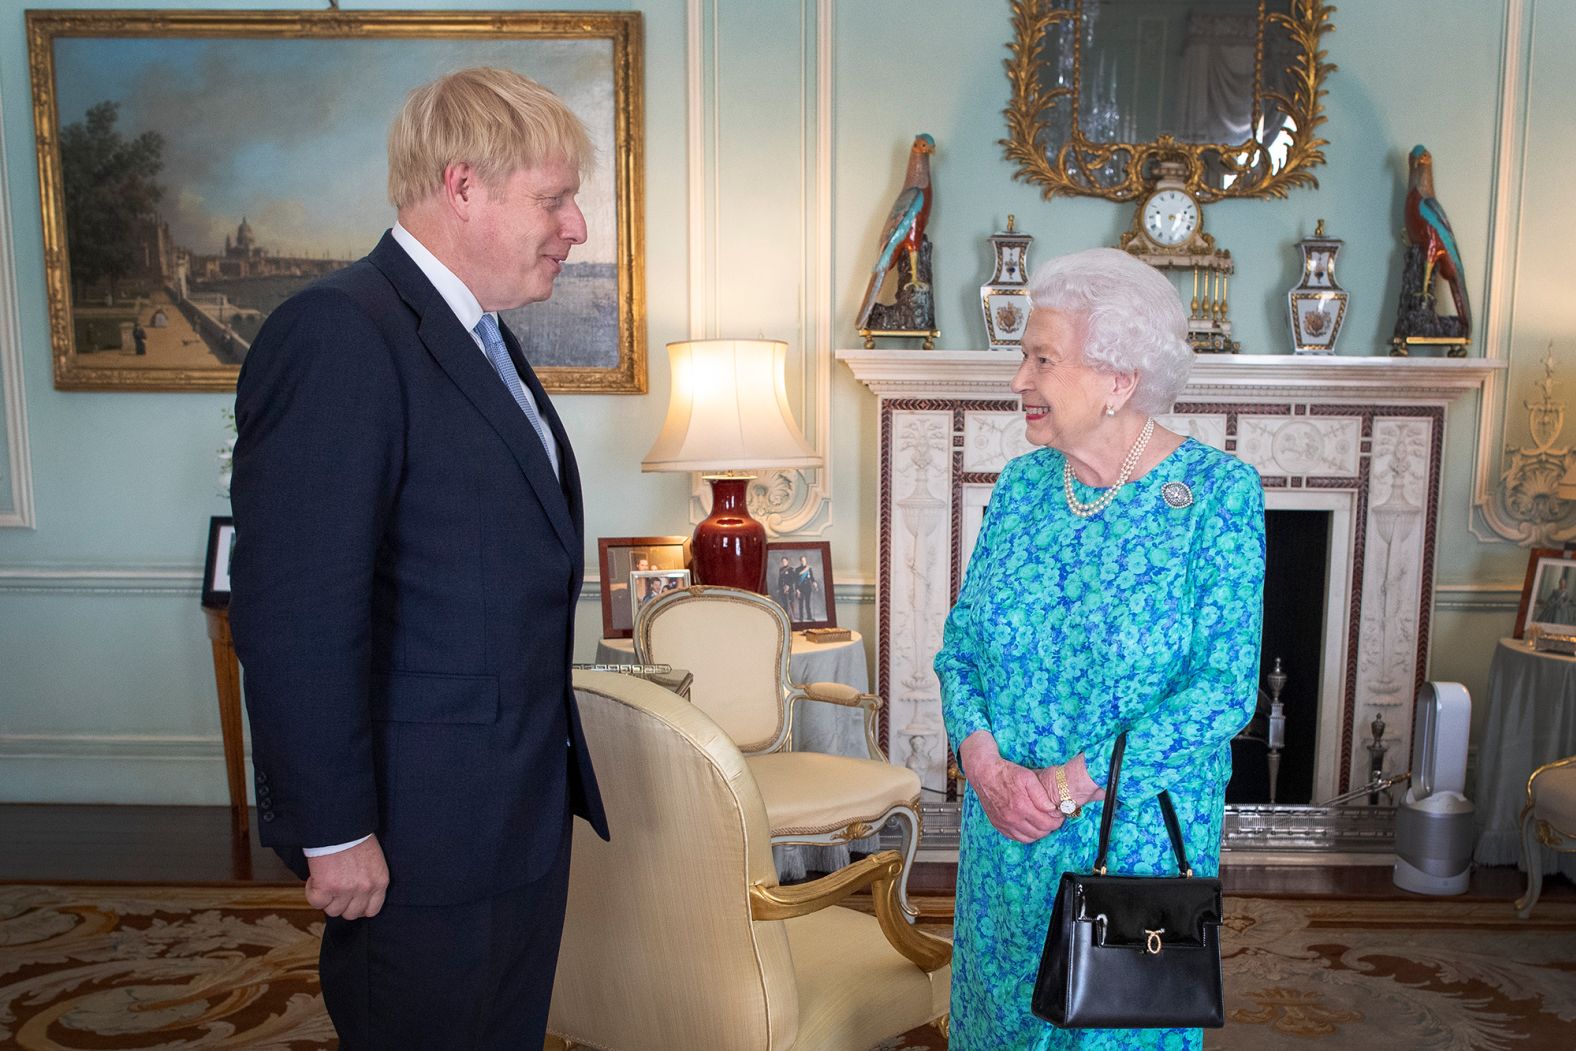 <strong>Boris Johnson (2019-2022): </strong>Johnson has always described himself as a monarchist who holds the Queen in the highest regard. But on more than one occasion, he pushed the monarch's position of impartiality to its limits. The prime minister had to twice apologize to the sovereign -- most recently as a result of<a href="index.php?page=&url=https%3A%2F%2Fwww.cnn.com%2F2022%2F01%2F14%2Fuk%2Fdowning-street-party-philip-funeral-intl-gbr%2Findex.html" target="_blank"> parties at 10 Downing Street </a>on the eve of Prince Philip's funeral when the rest of the country was facing pandemic restrictions. The other apology was <a href="index.php?page=&url=https%3A%2F%2Fwww.cnn.com%2F2019%2F12%2F26%2Fuk%2Fuk-royal-family-year-in-review-intl-gbr%2Findex.html" target="_blank">reportedly back in 2019</a> over the unlawful prorogation of Parliament.